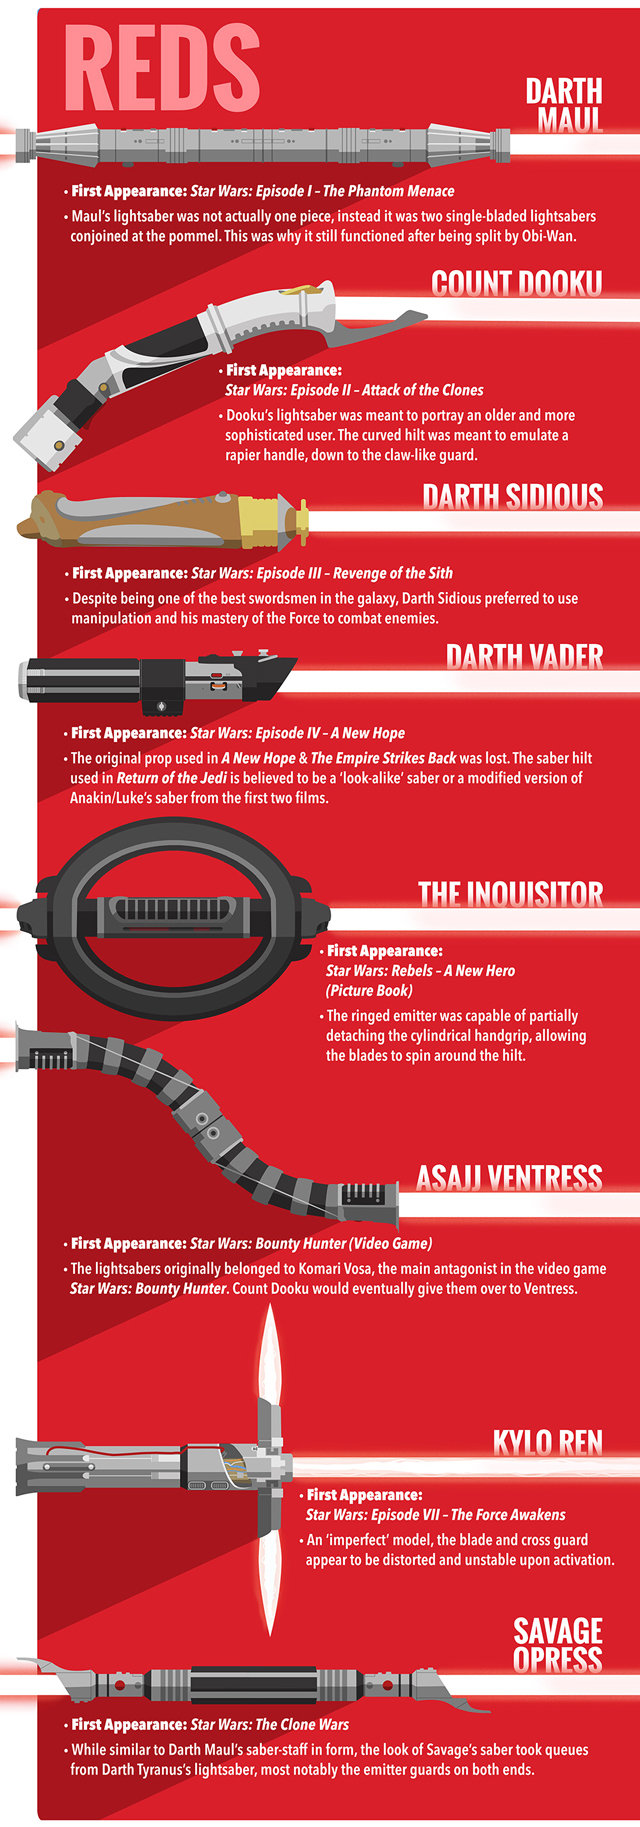 The History Of Jedi And Sith Lightsabers